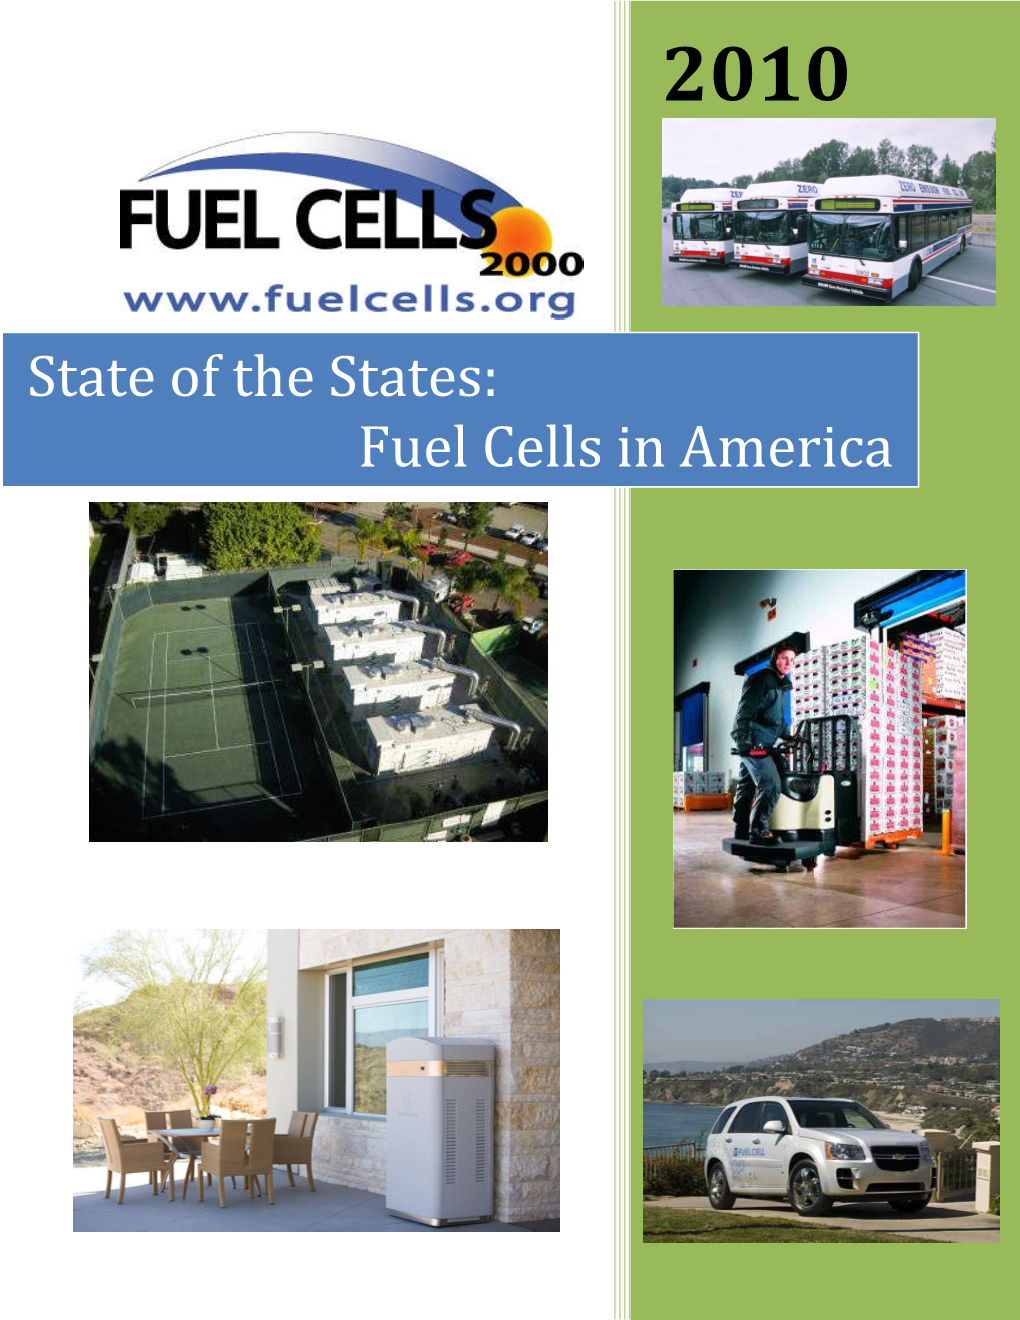 Fuel Cells in America Authors and Acknowledgements